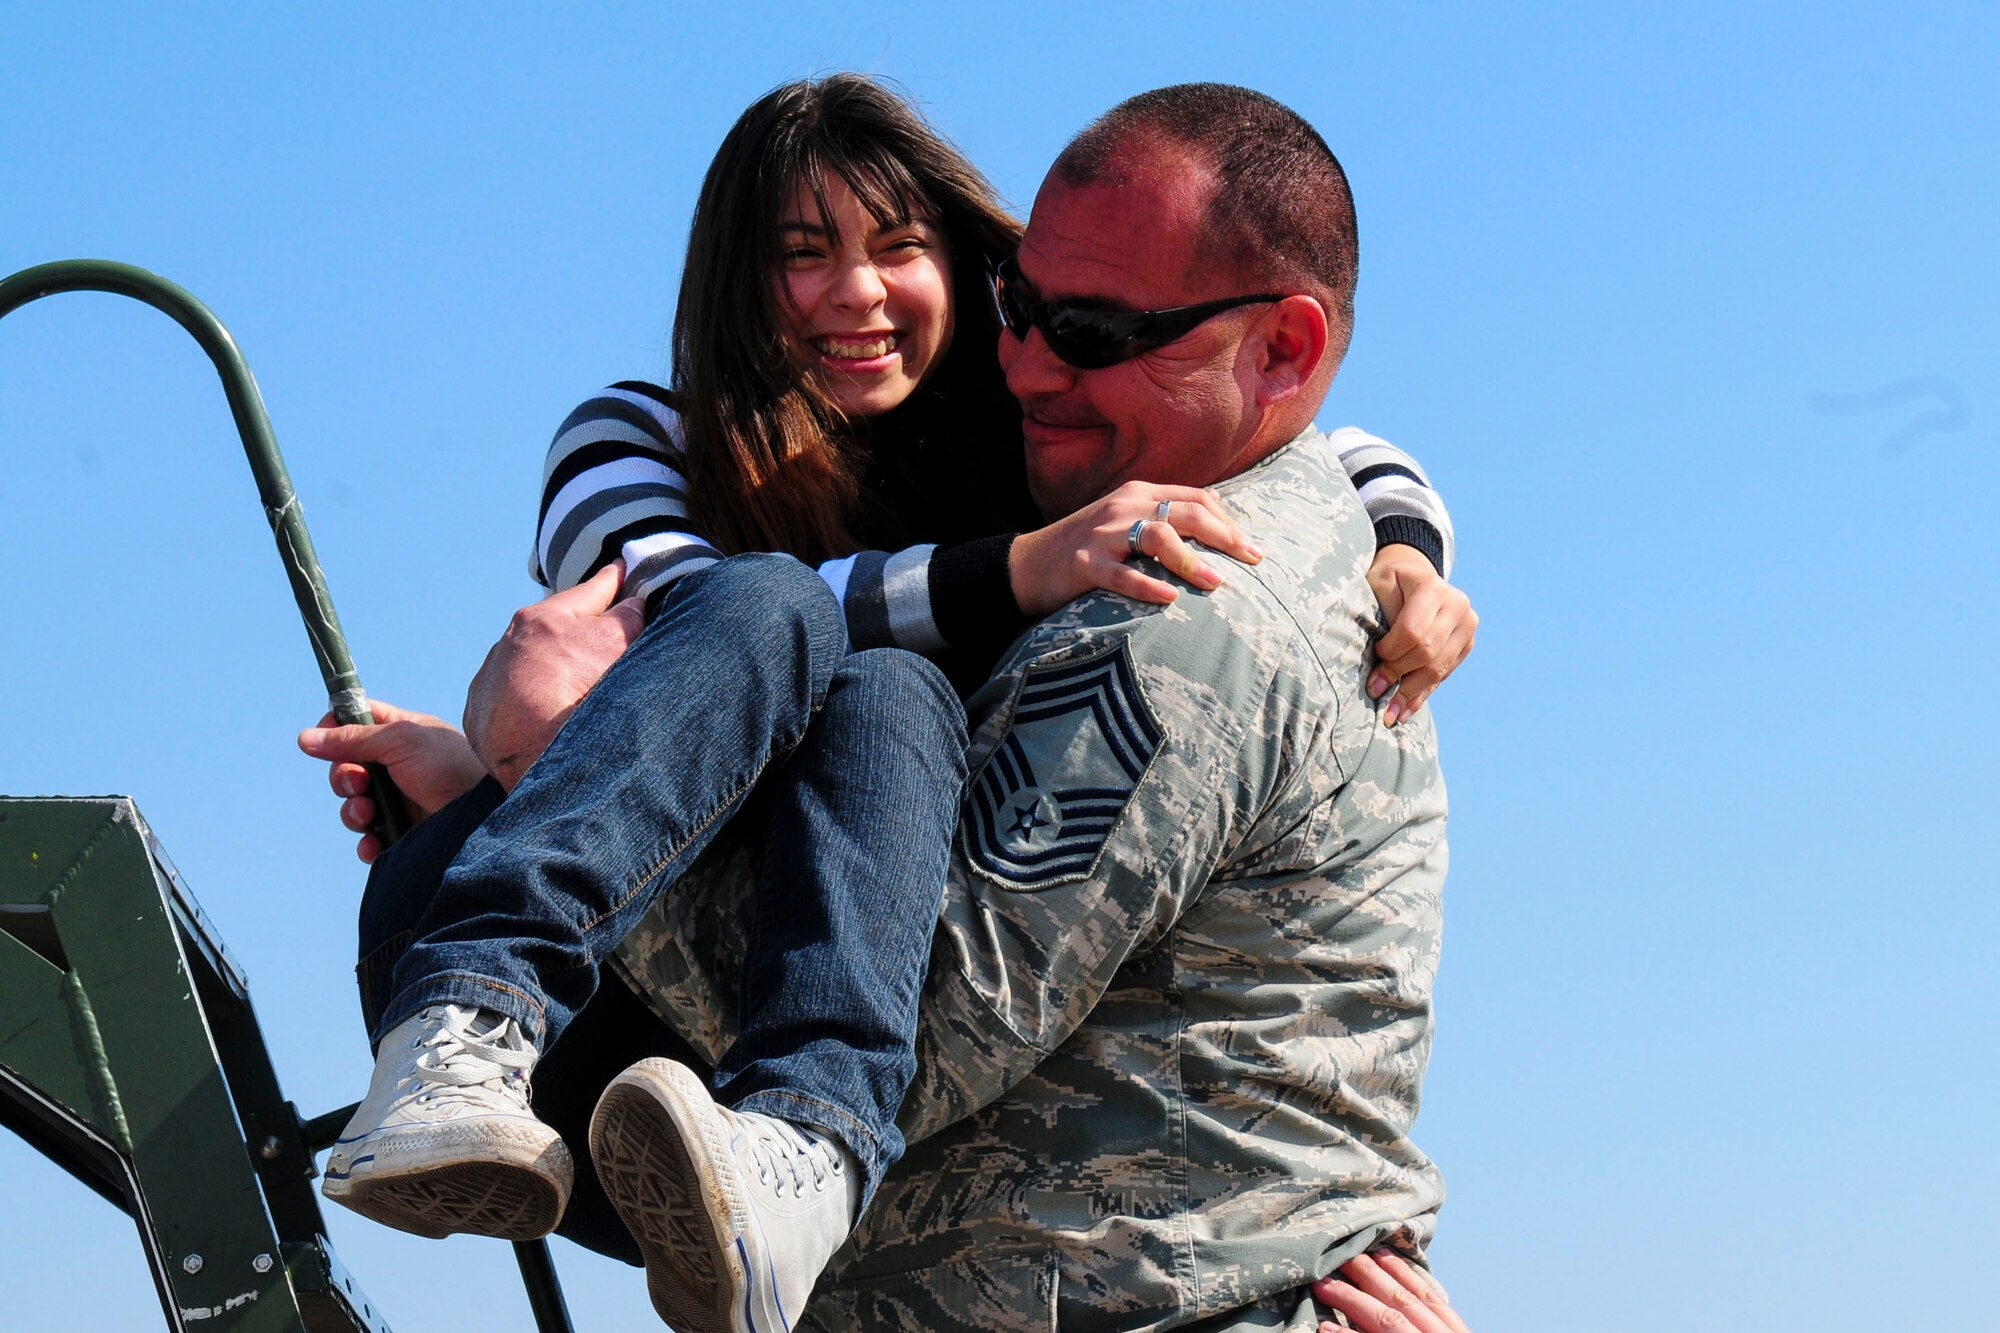 Chief Master Sgt. Caesar Acosta, an aircraft maintenance specialist for the Texas Air National Guard, carries a wheelchair-bound Chilean girl up stairs to look inside the cockpit of a U.S. F-16 Fighting Falcon at the FIDAE Air Show in Santiago, Chile, March 26.  Nearly 60 U.S. airmen are participating in subject matter expert exchanges with Chilean air force counterparts during FIDAE, and as part of the events are hosting static displays of the C-130 Hercules and F-16.  Airmen from the Texas Air National Guard set aside time to host the children before the public days of FIDAE, which are scheduled for the weekend. (U.S. Air Force photo by Senior Master Sgt. Miguel Arellano/Released)